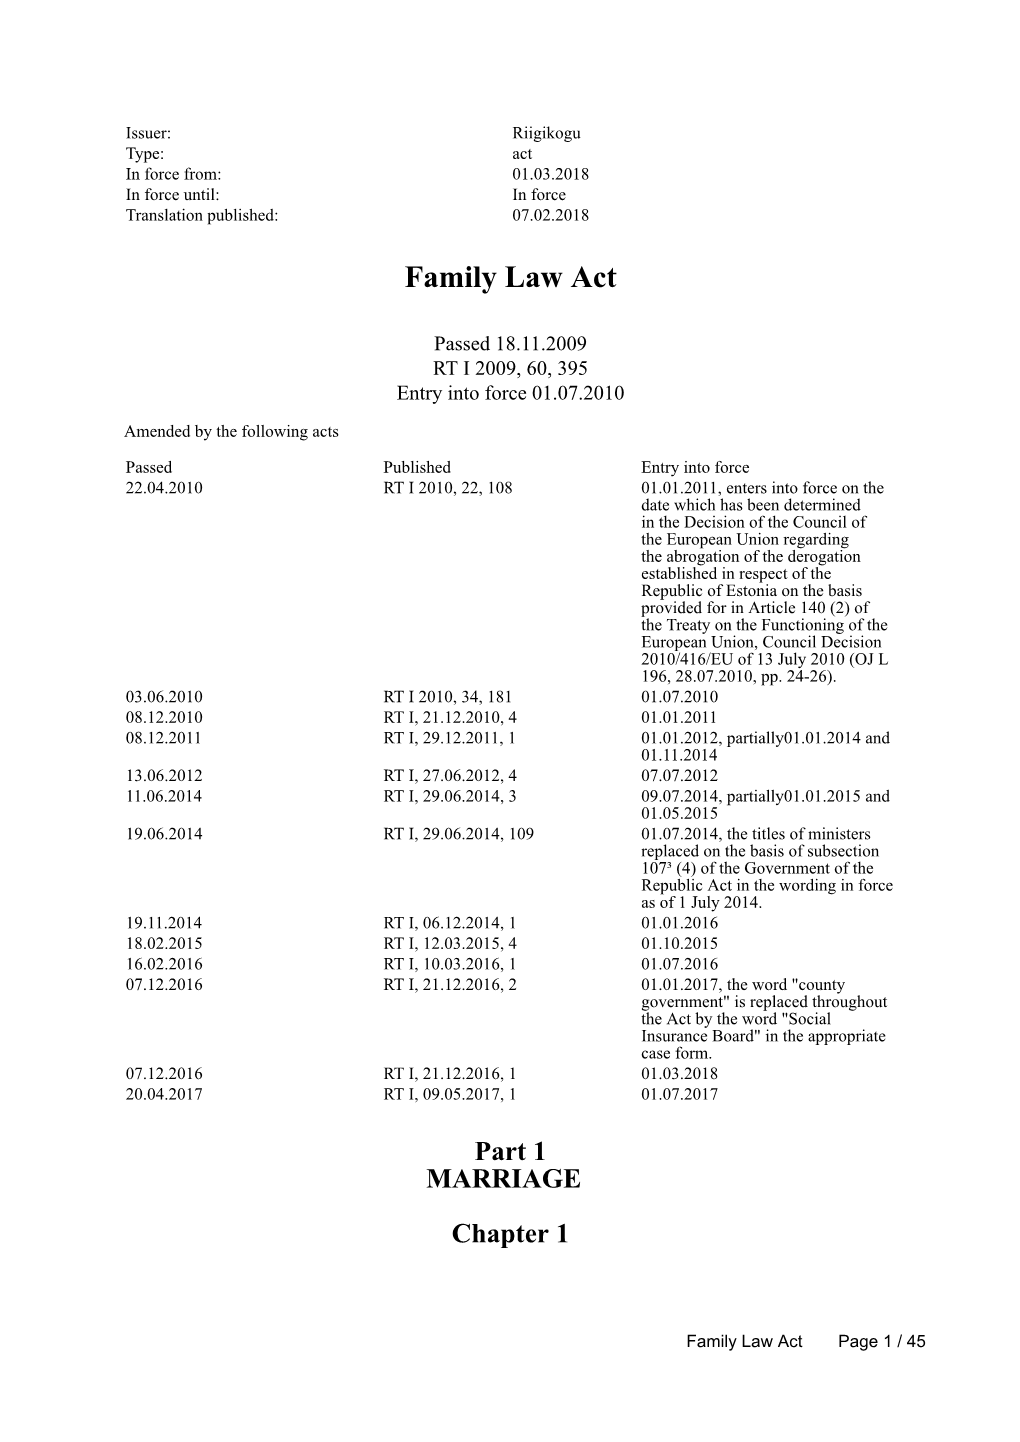 Family Law Act